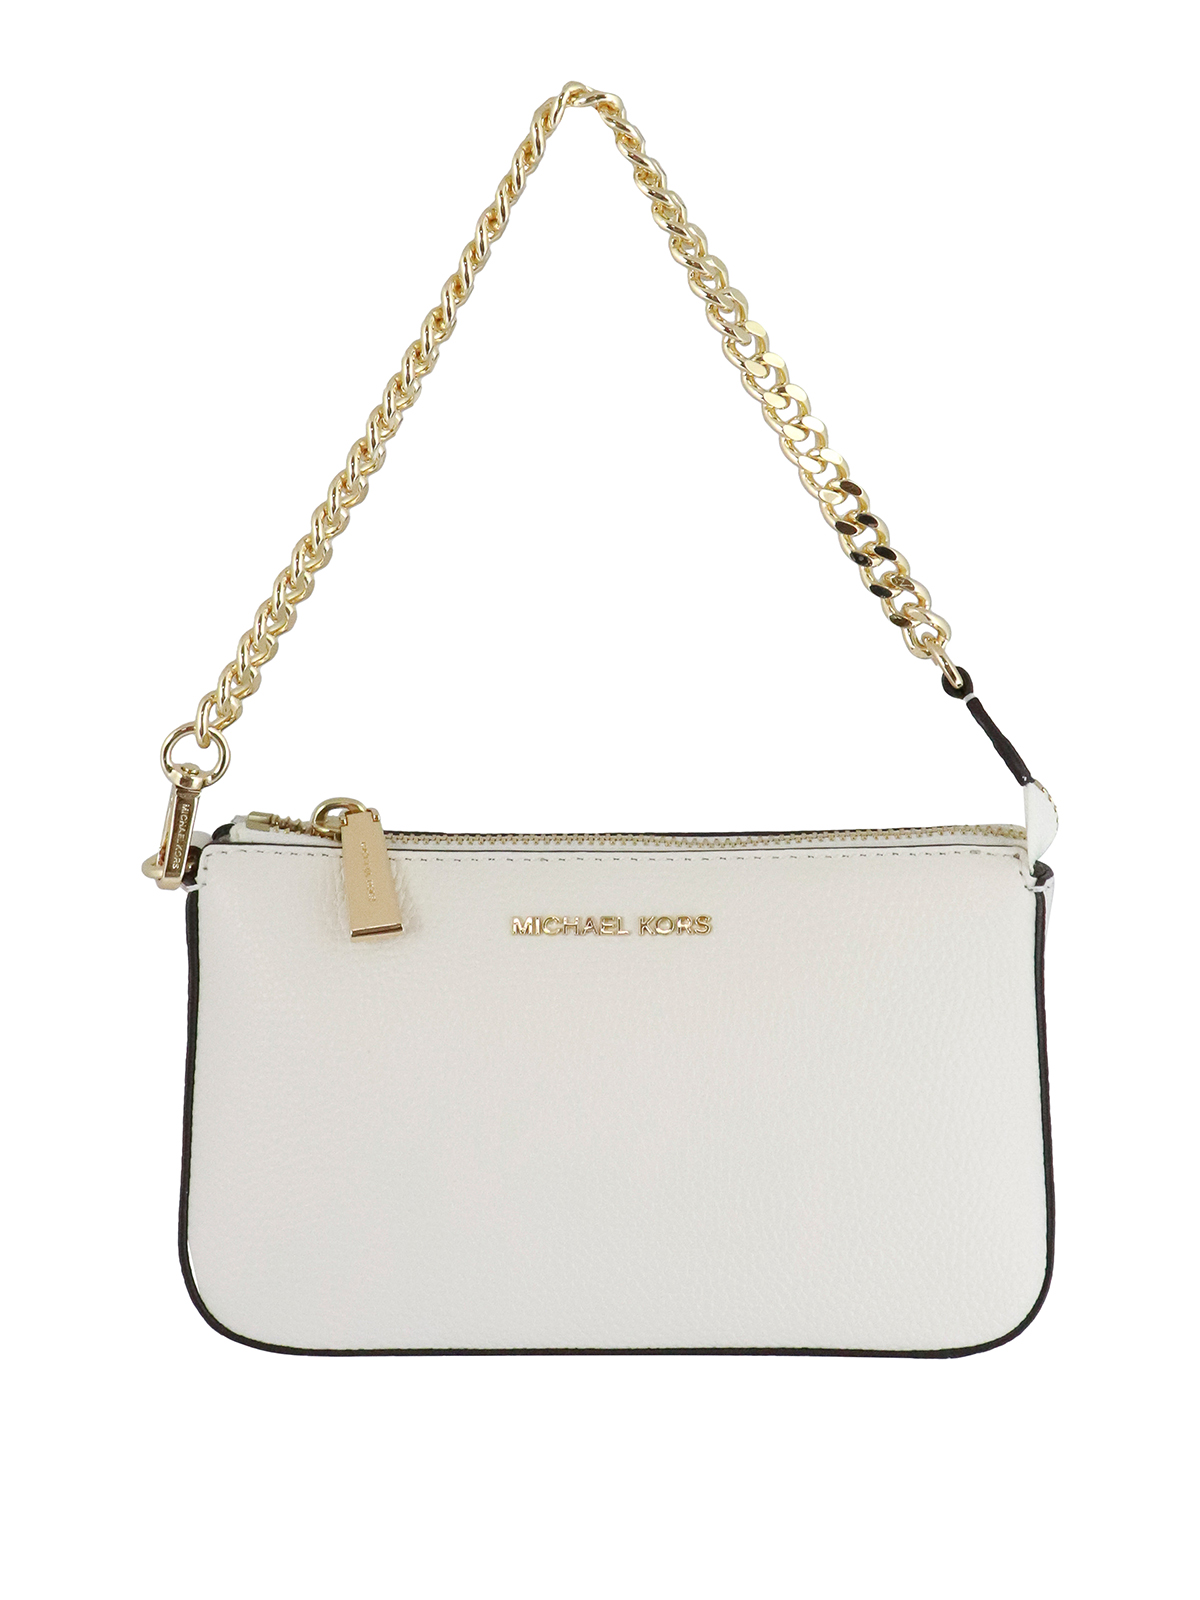 Michael Michael Kors chain clutch in hammered leather